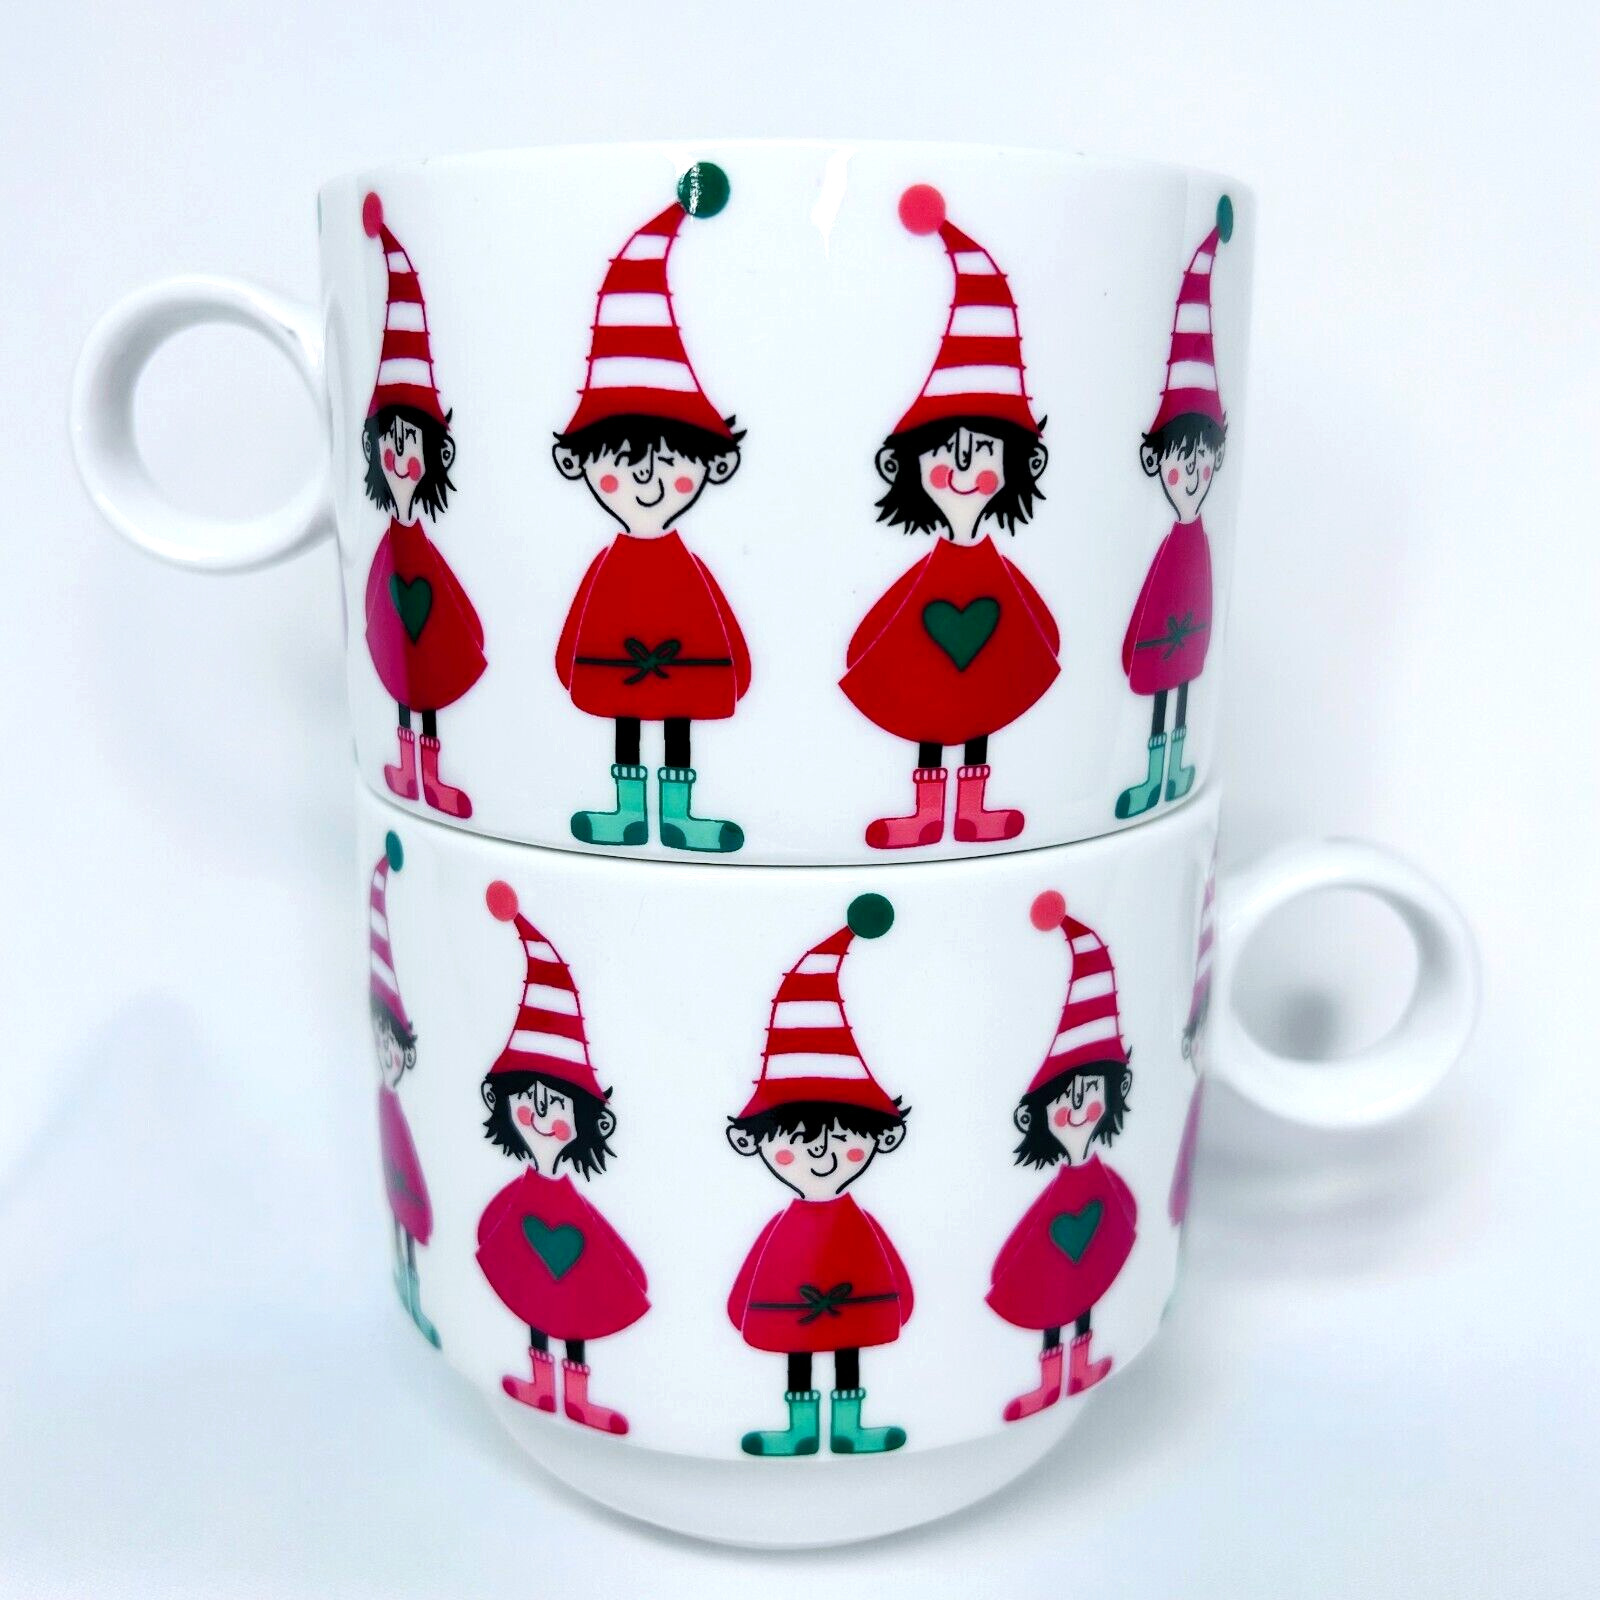 Grace Fine Porcelain Elves Around the Coffee Cup Mug - Stackable Set Of 2